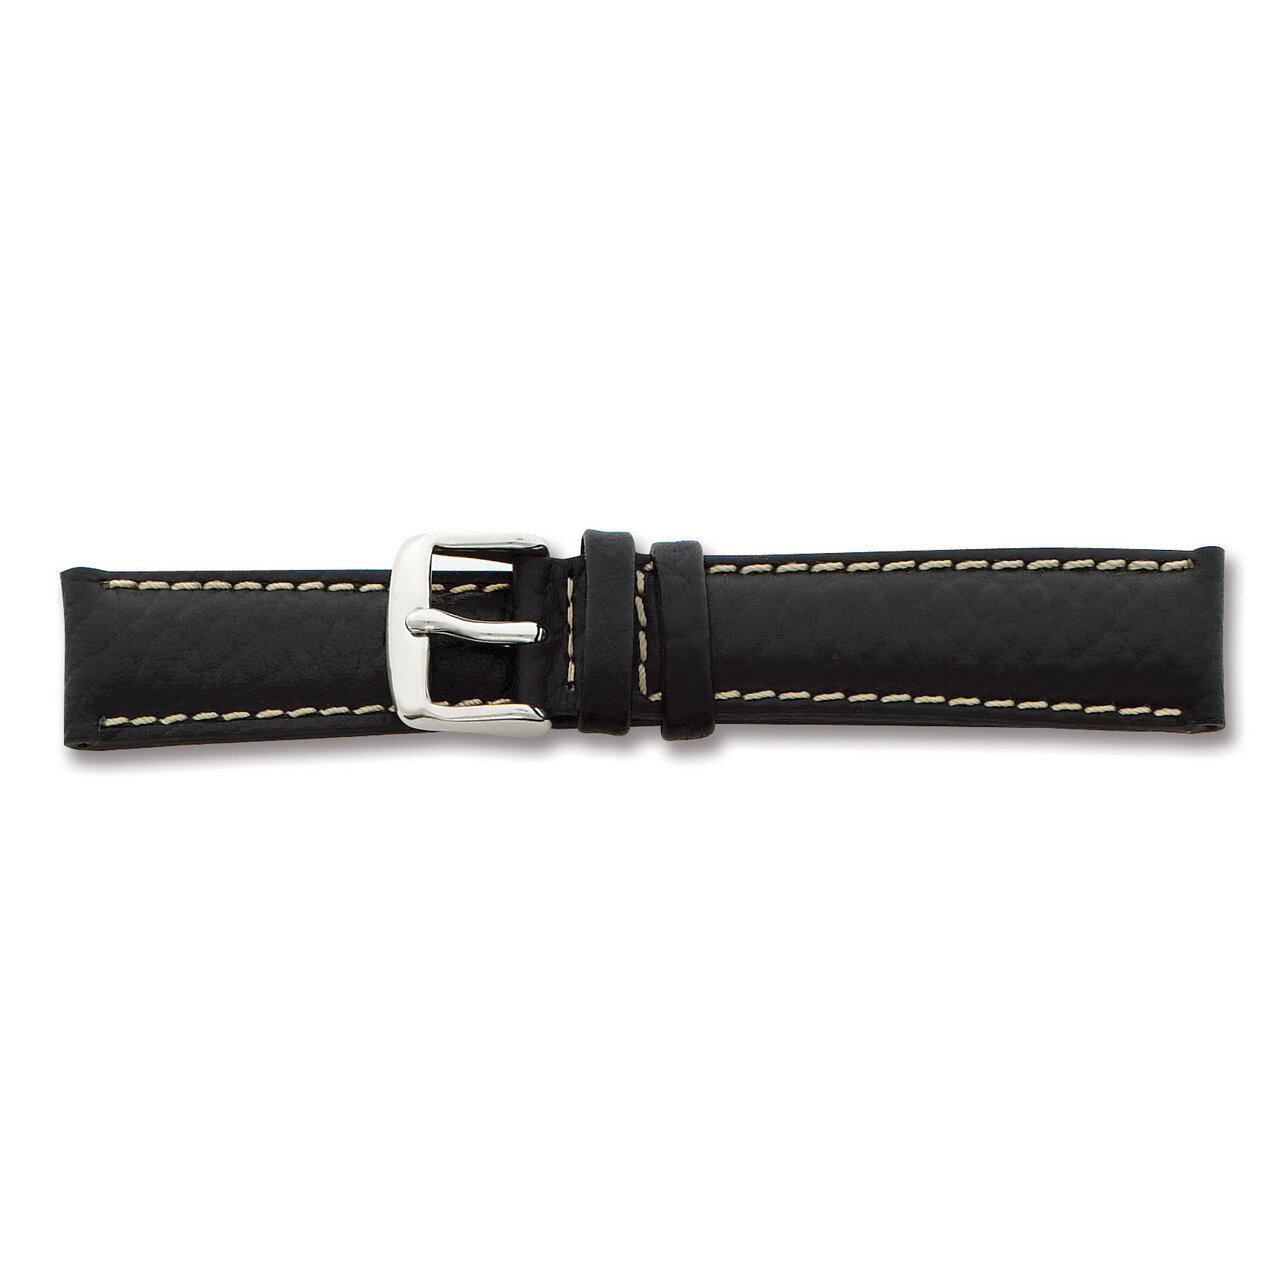 17mm Black Leather White Stitch Watch Band 7.5 Inch Silver-tone Buckle BA99-17